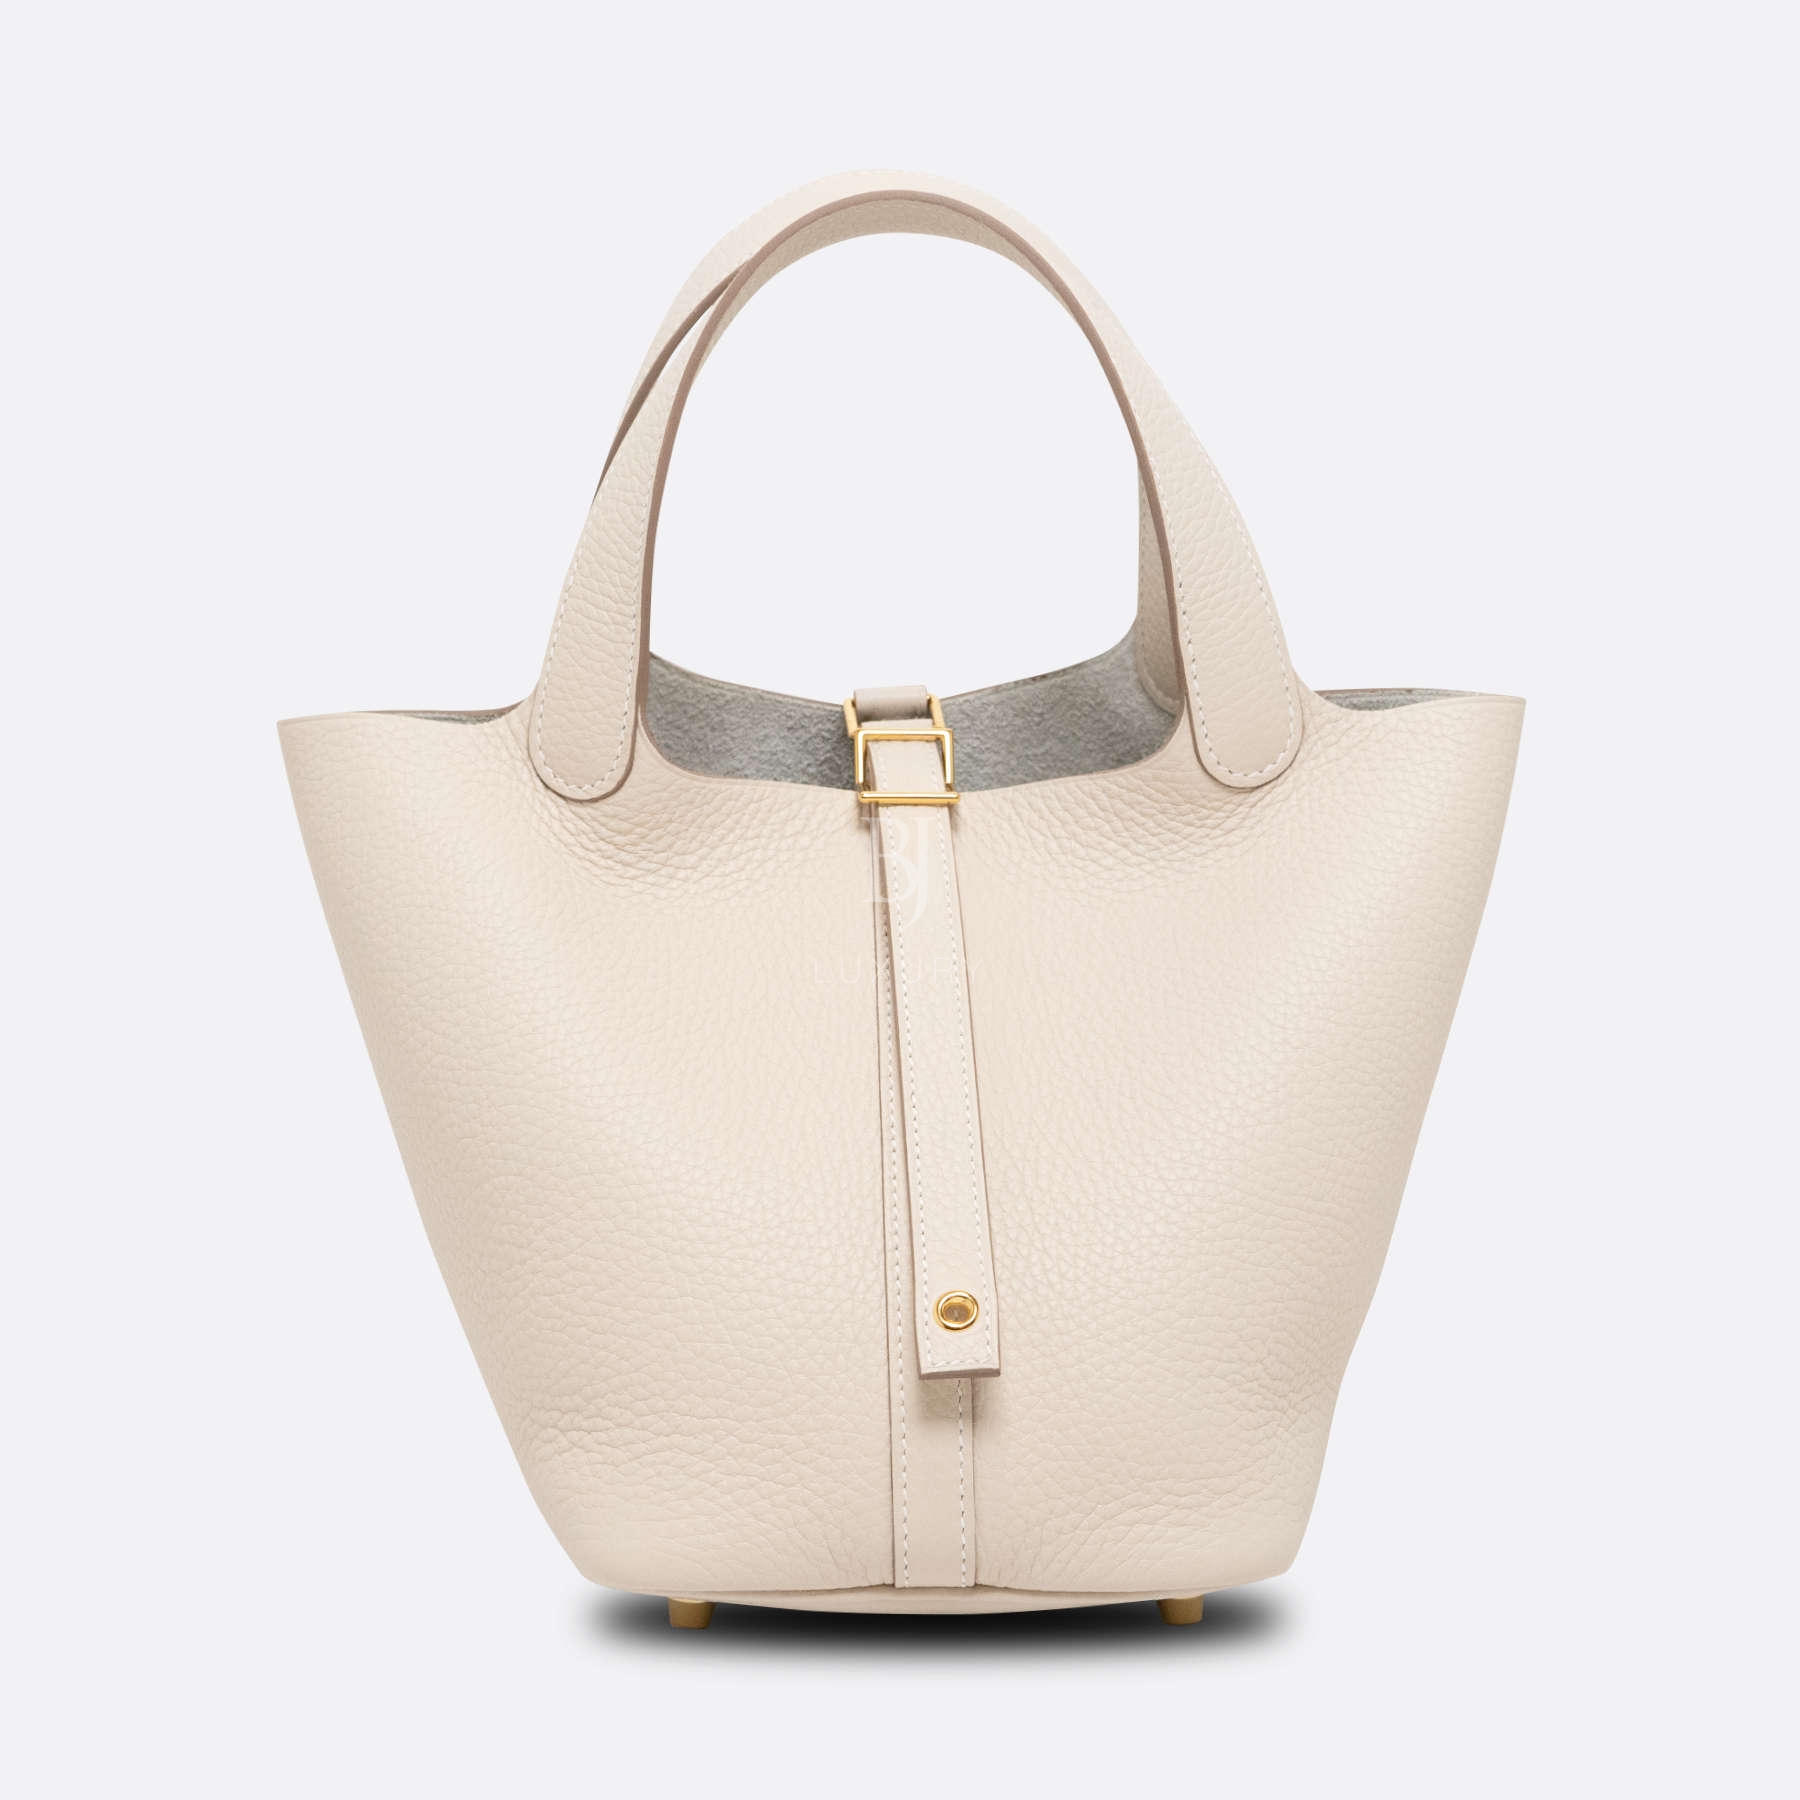 HERMES-PICOTIN-18-CRAIE-CLEMENCE-4381 front.jpg